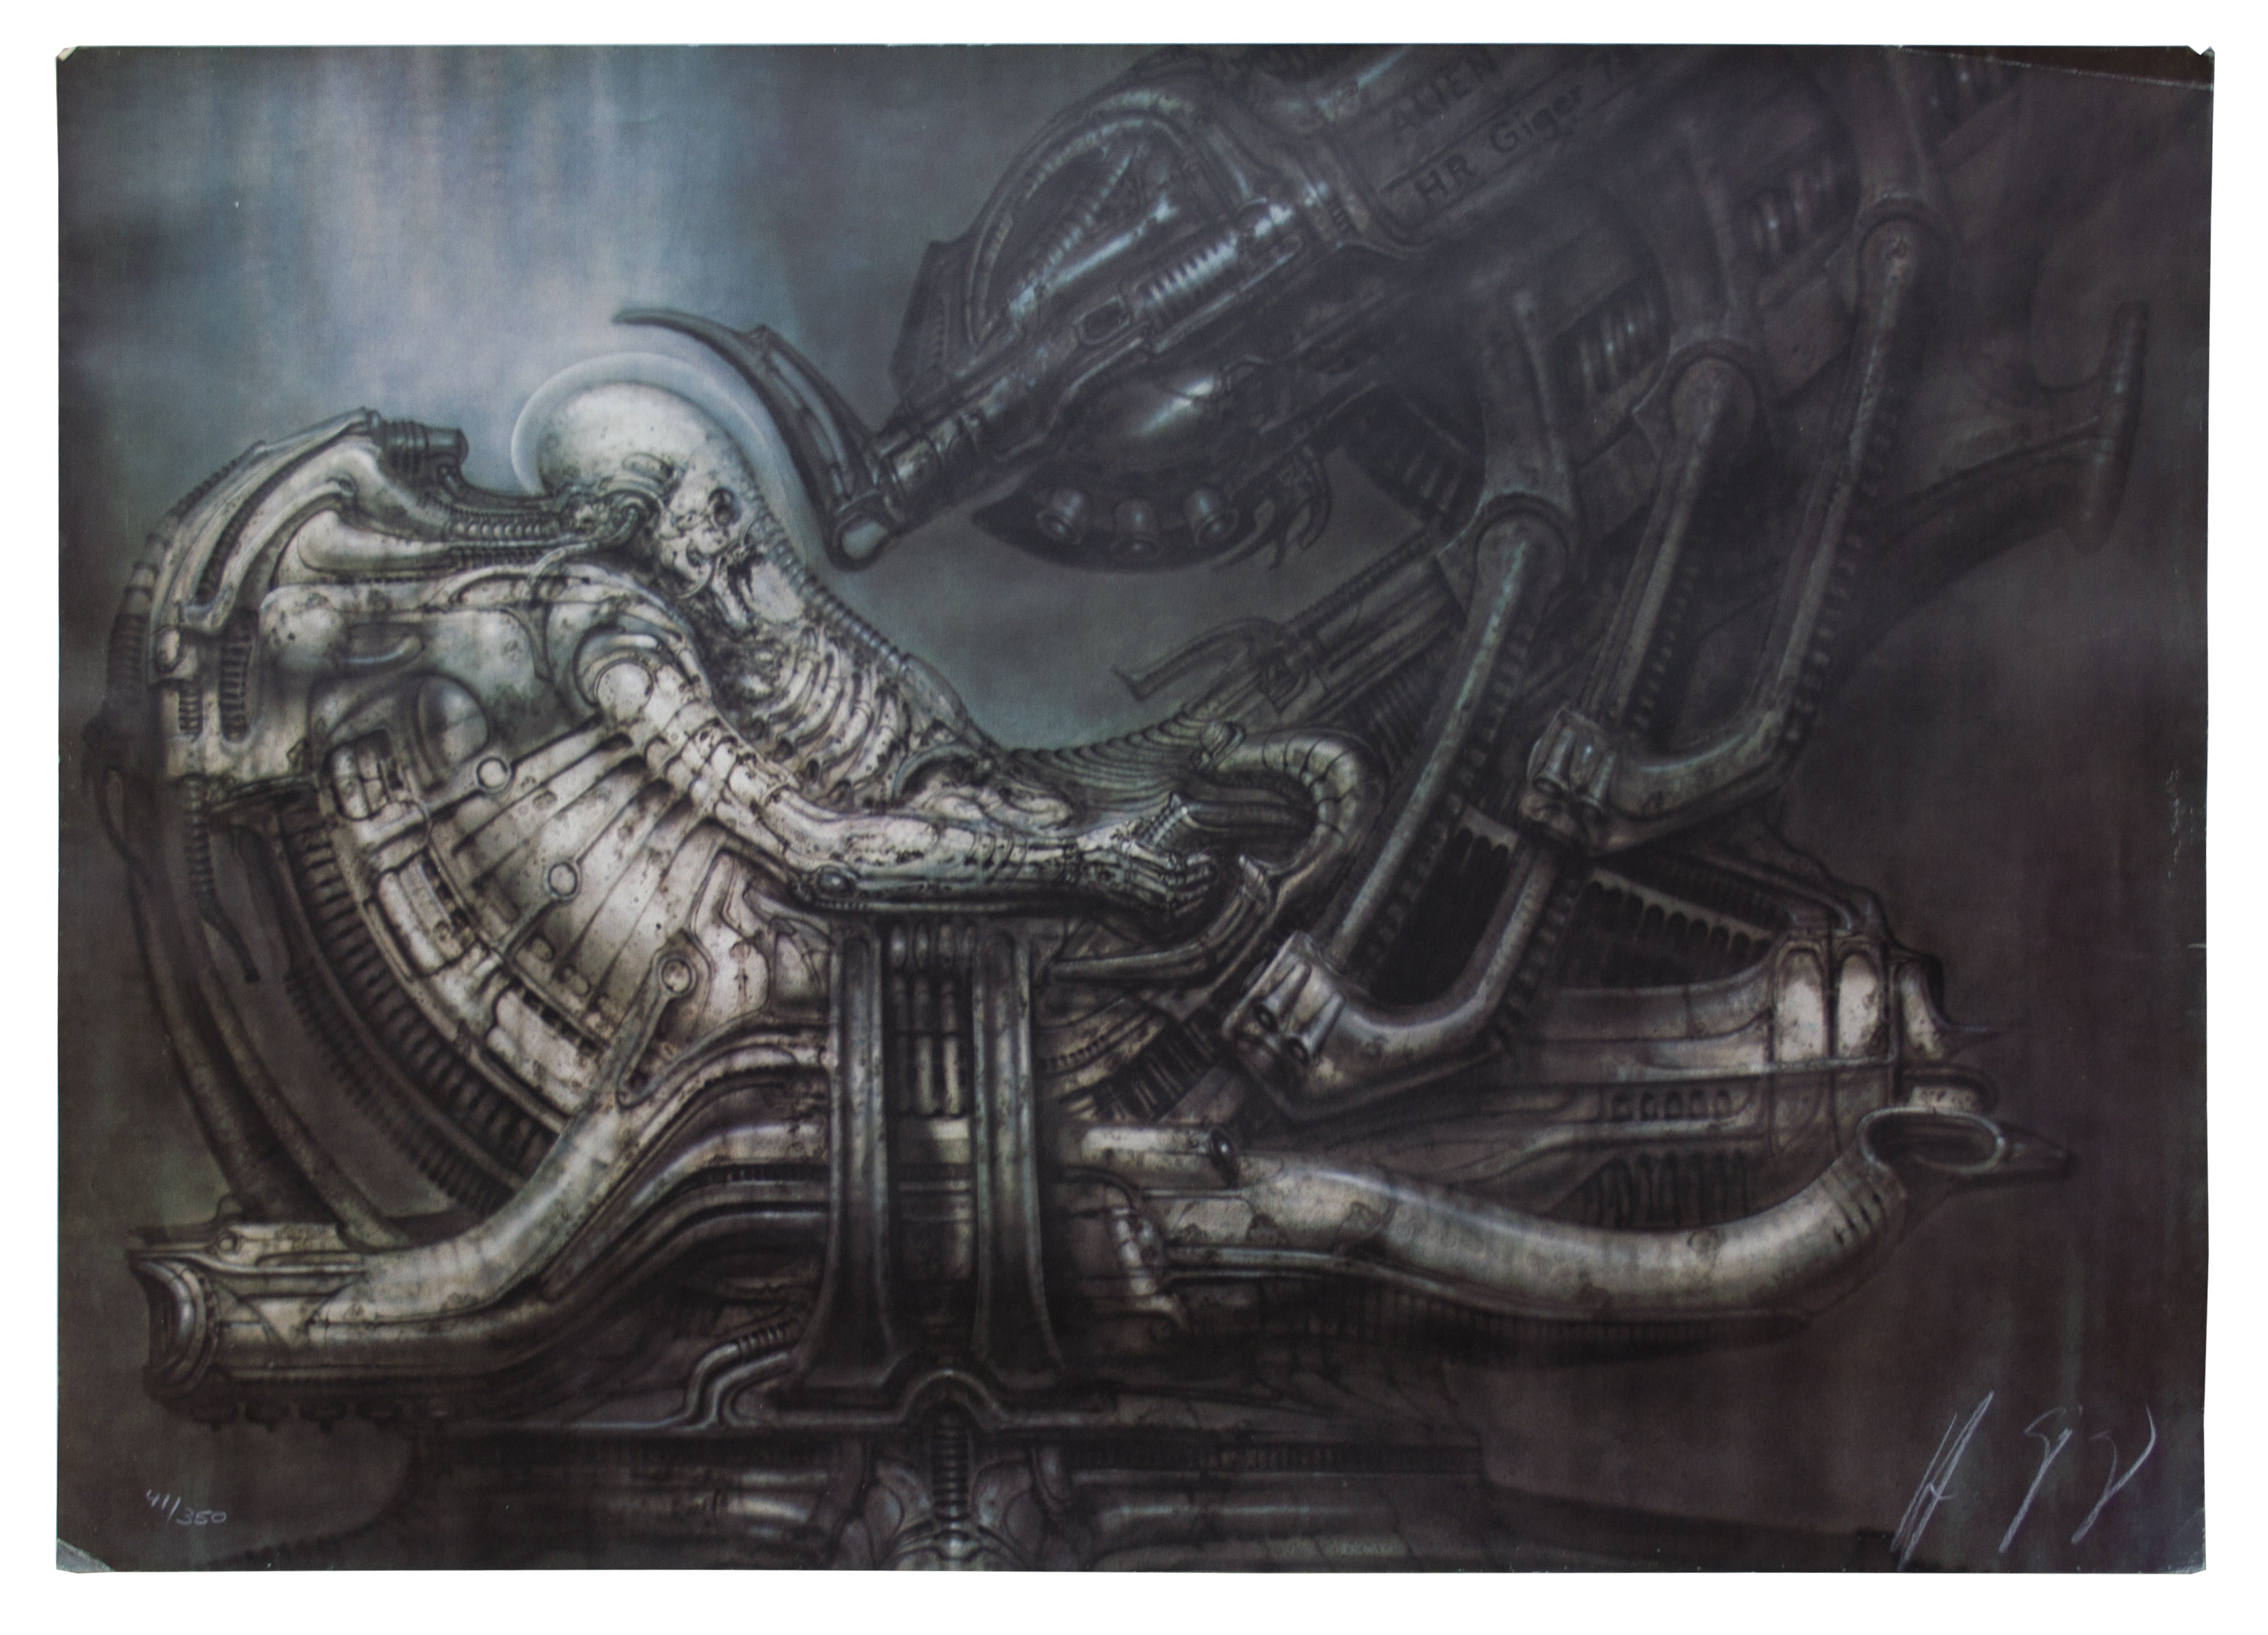 H.R.-Giger-Alien-Limited-Edition-Posters-41-350-54409c_lg.jpeg